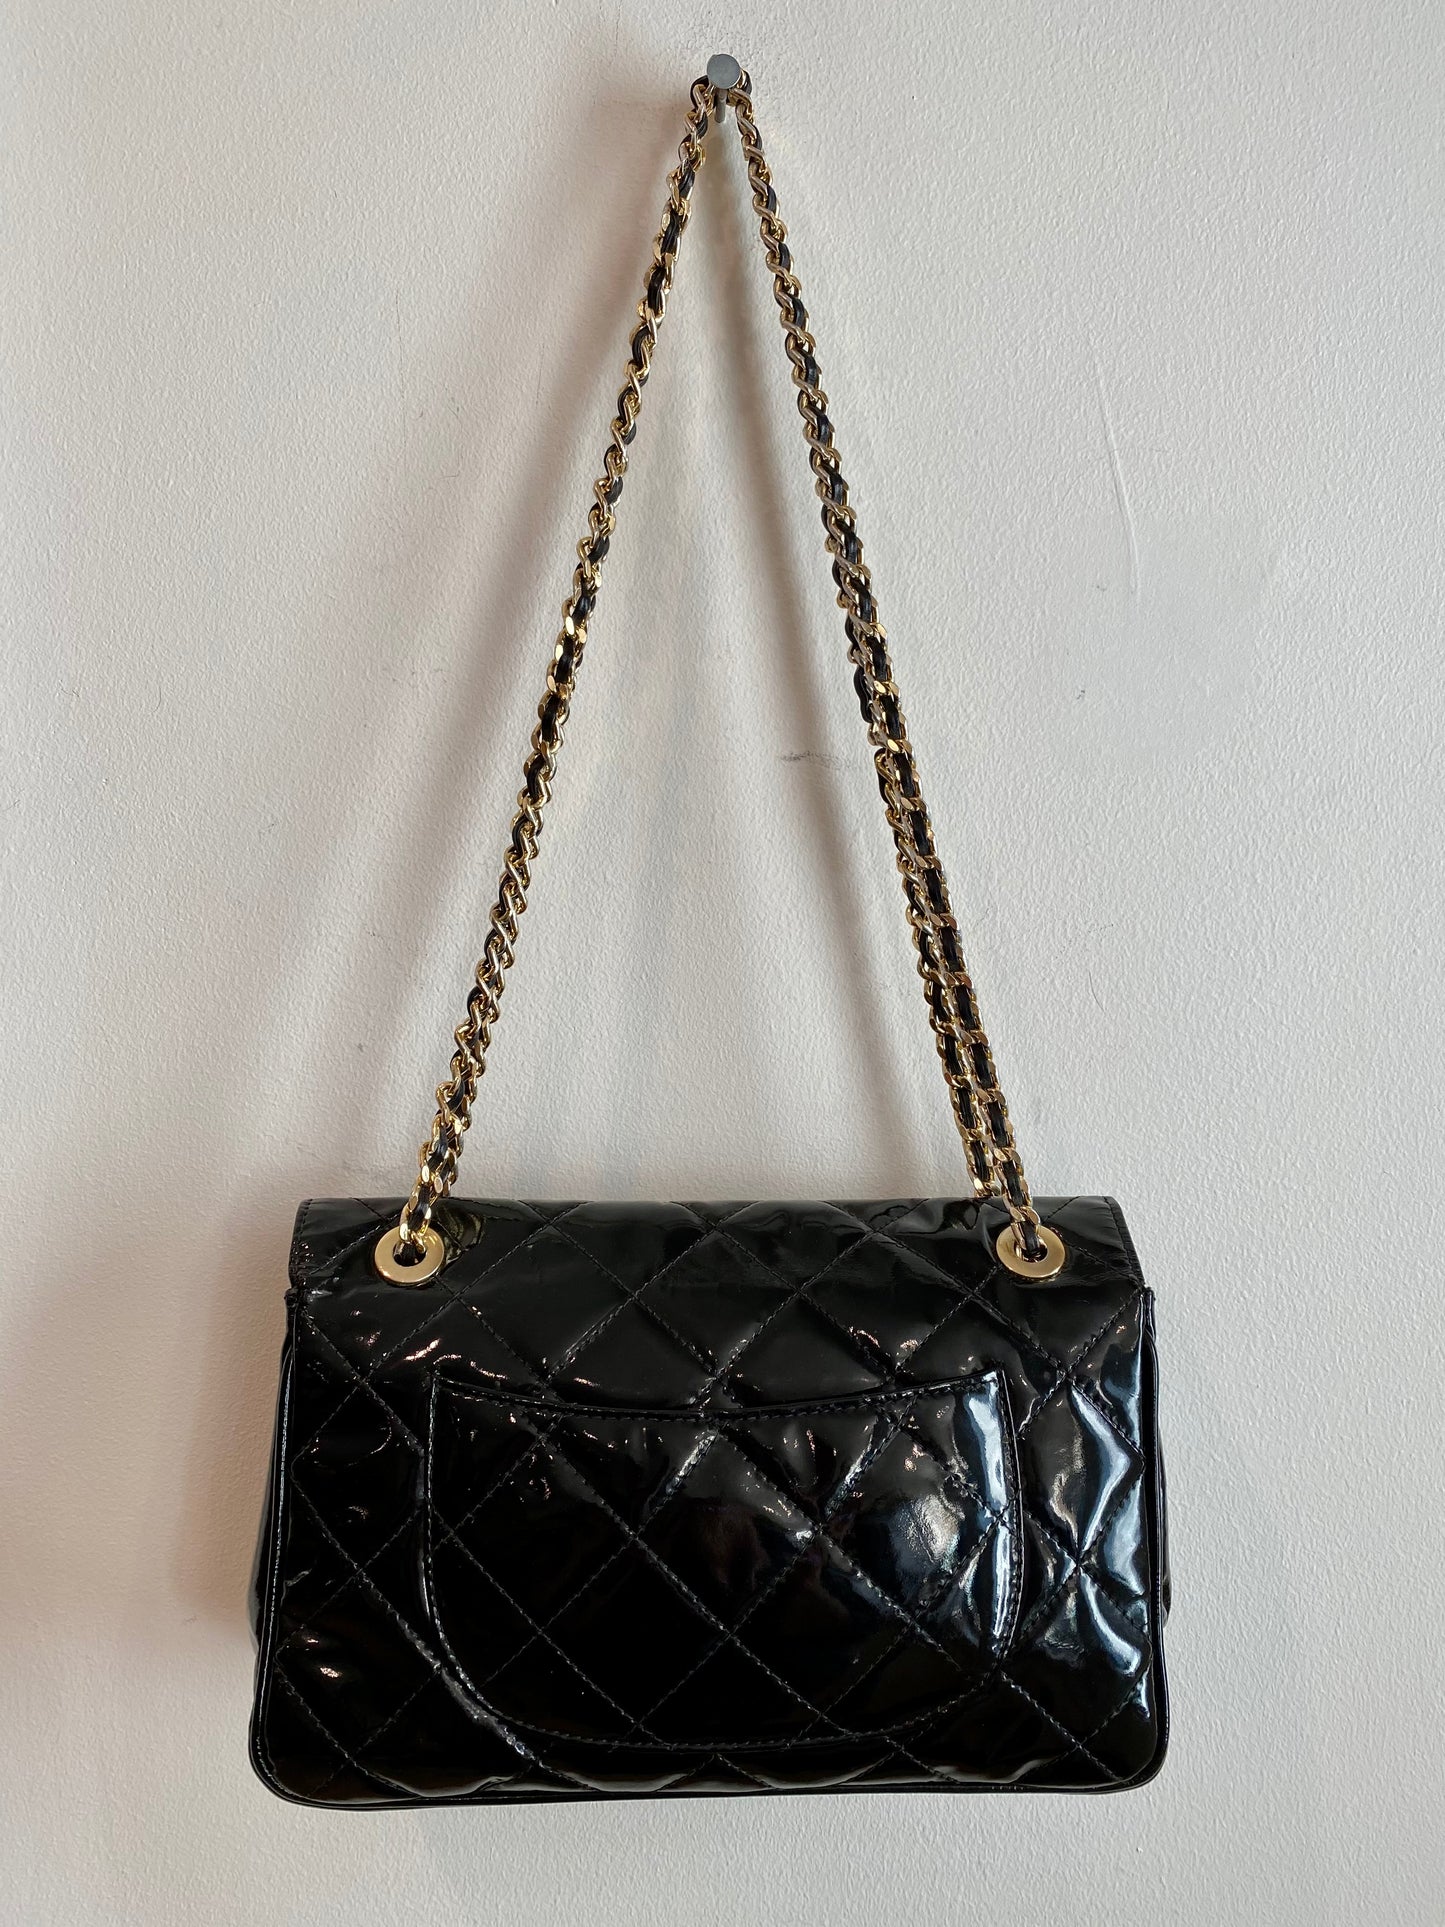 Black Patent Leather Quilted Bag